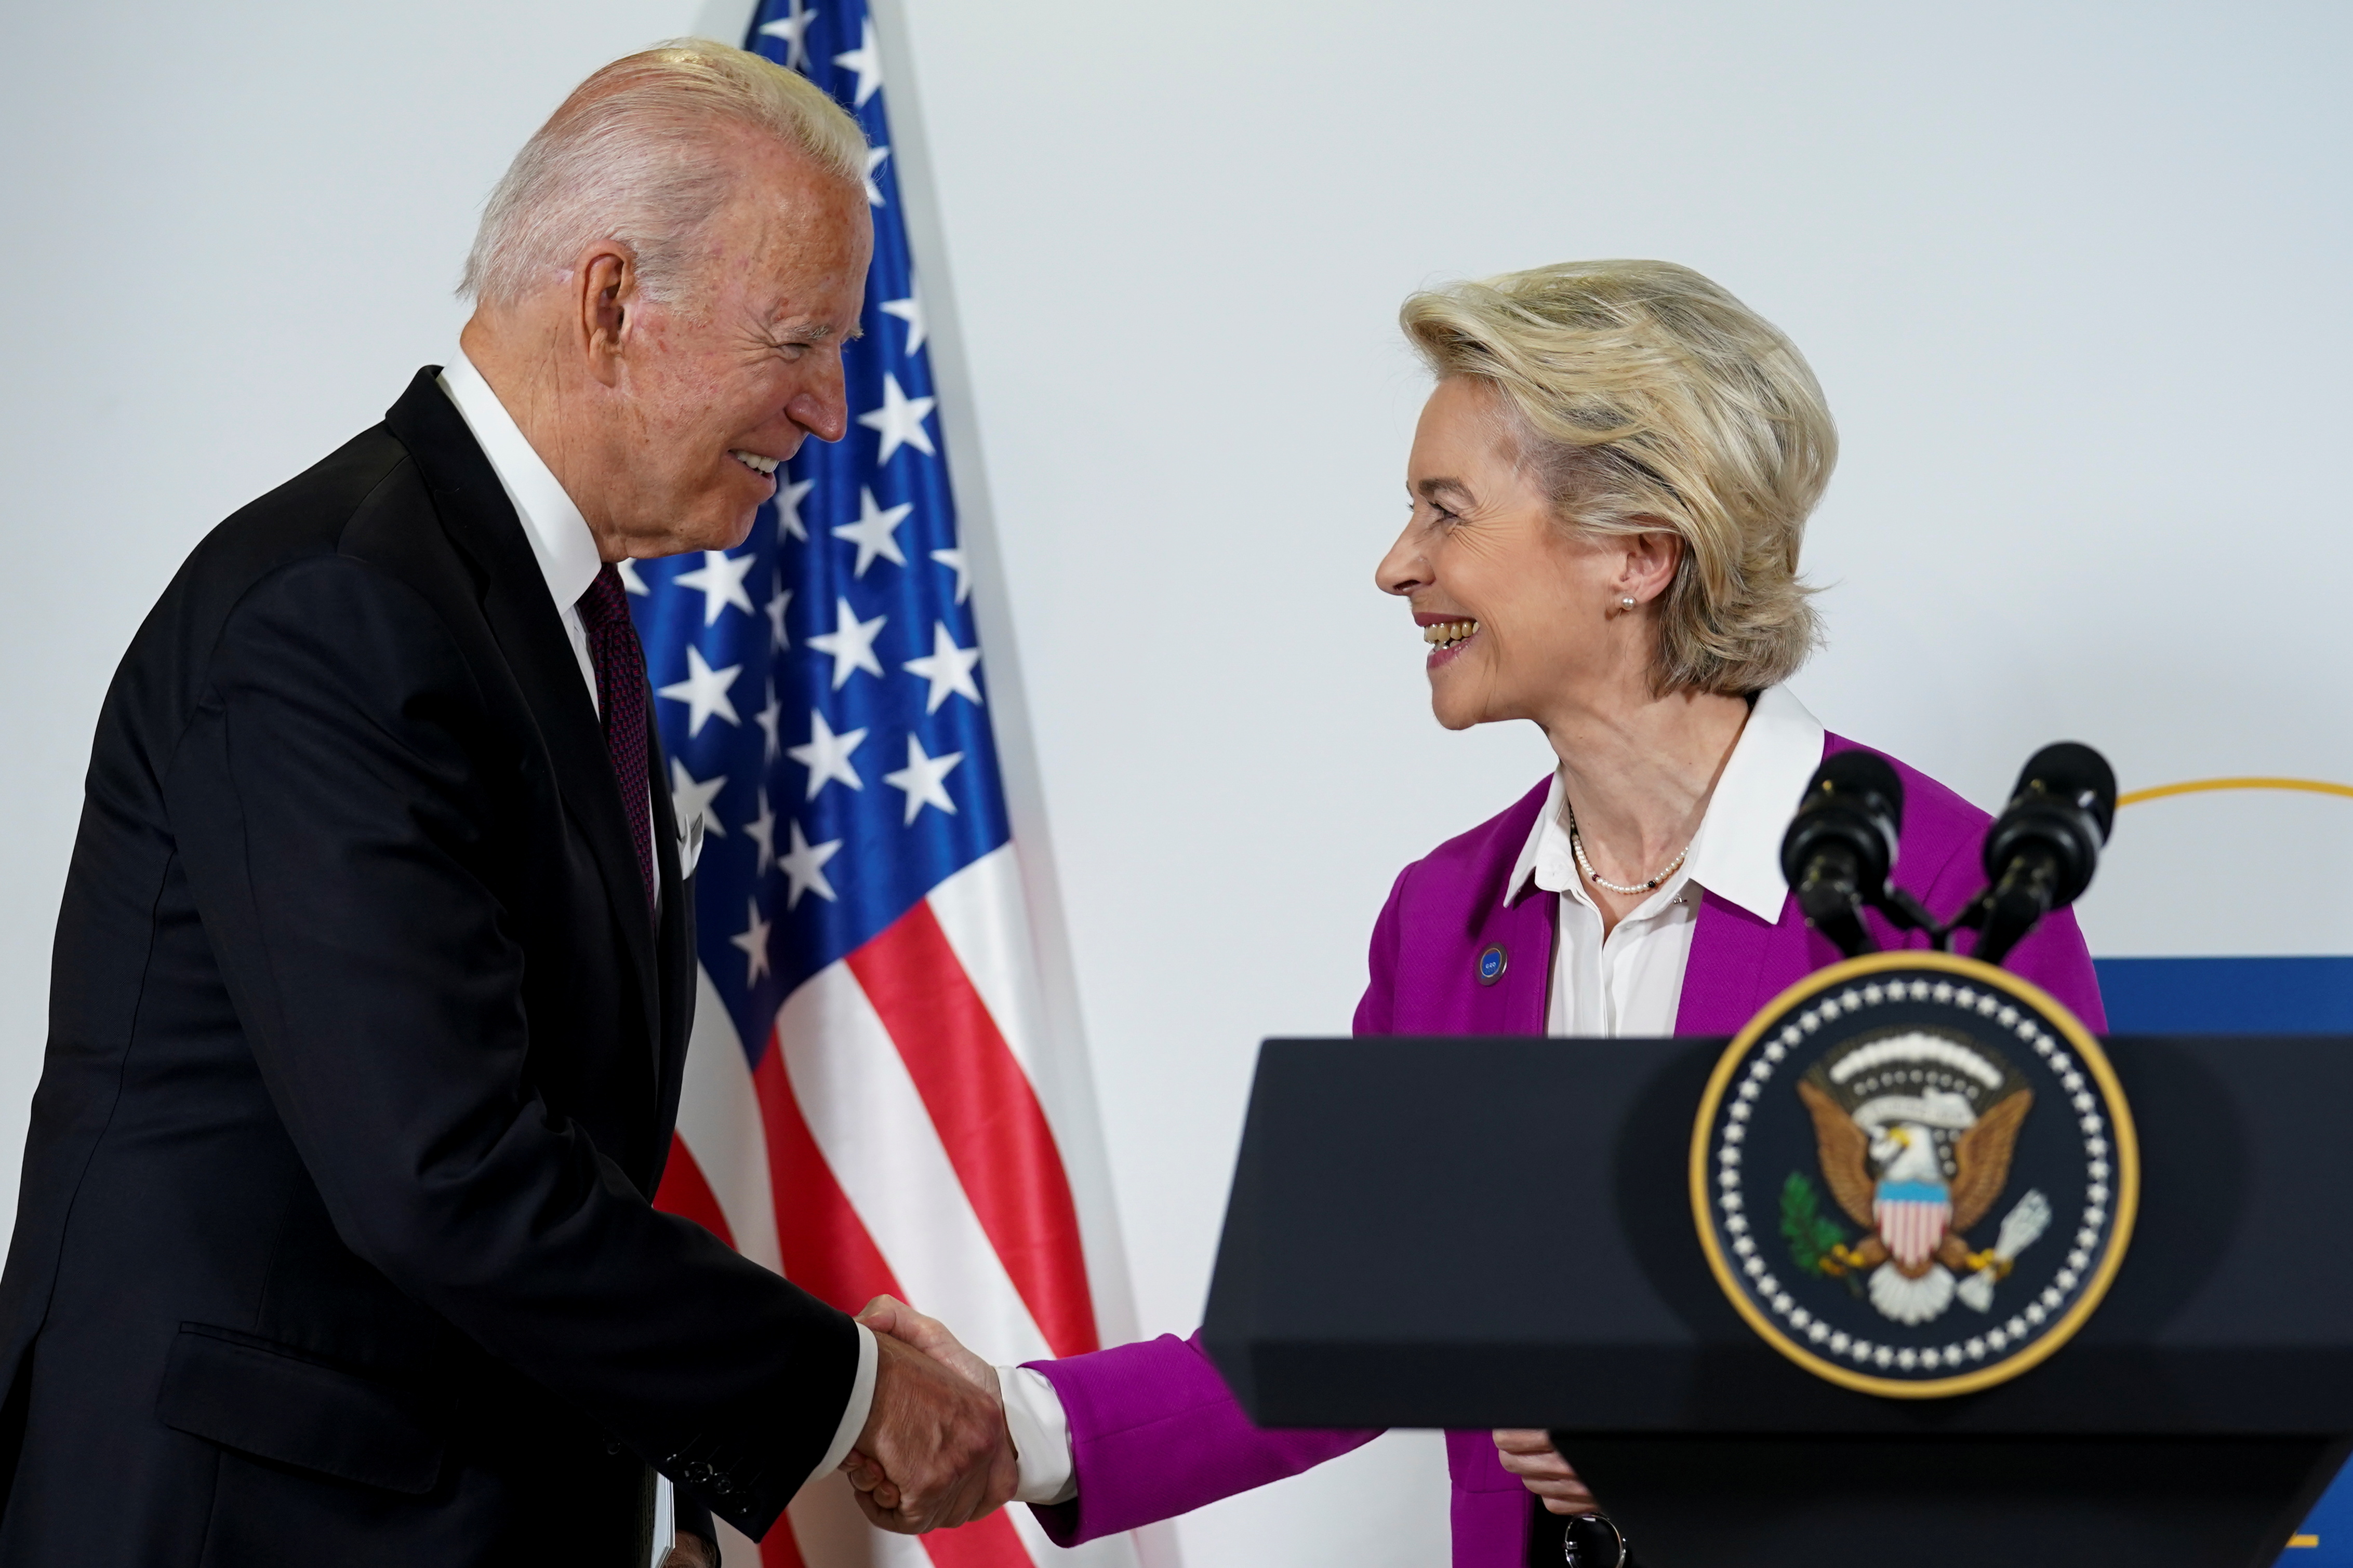 U.S. President Joe Biden and European Commission President Ursula von der Leyen shake hands after speaking about steel and aluminium tariffs, on the sidelines of the G20 leaders’ summit in Rome, Italy, October 31, 2021. REUTERS/Kevin Lamarque